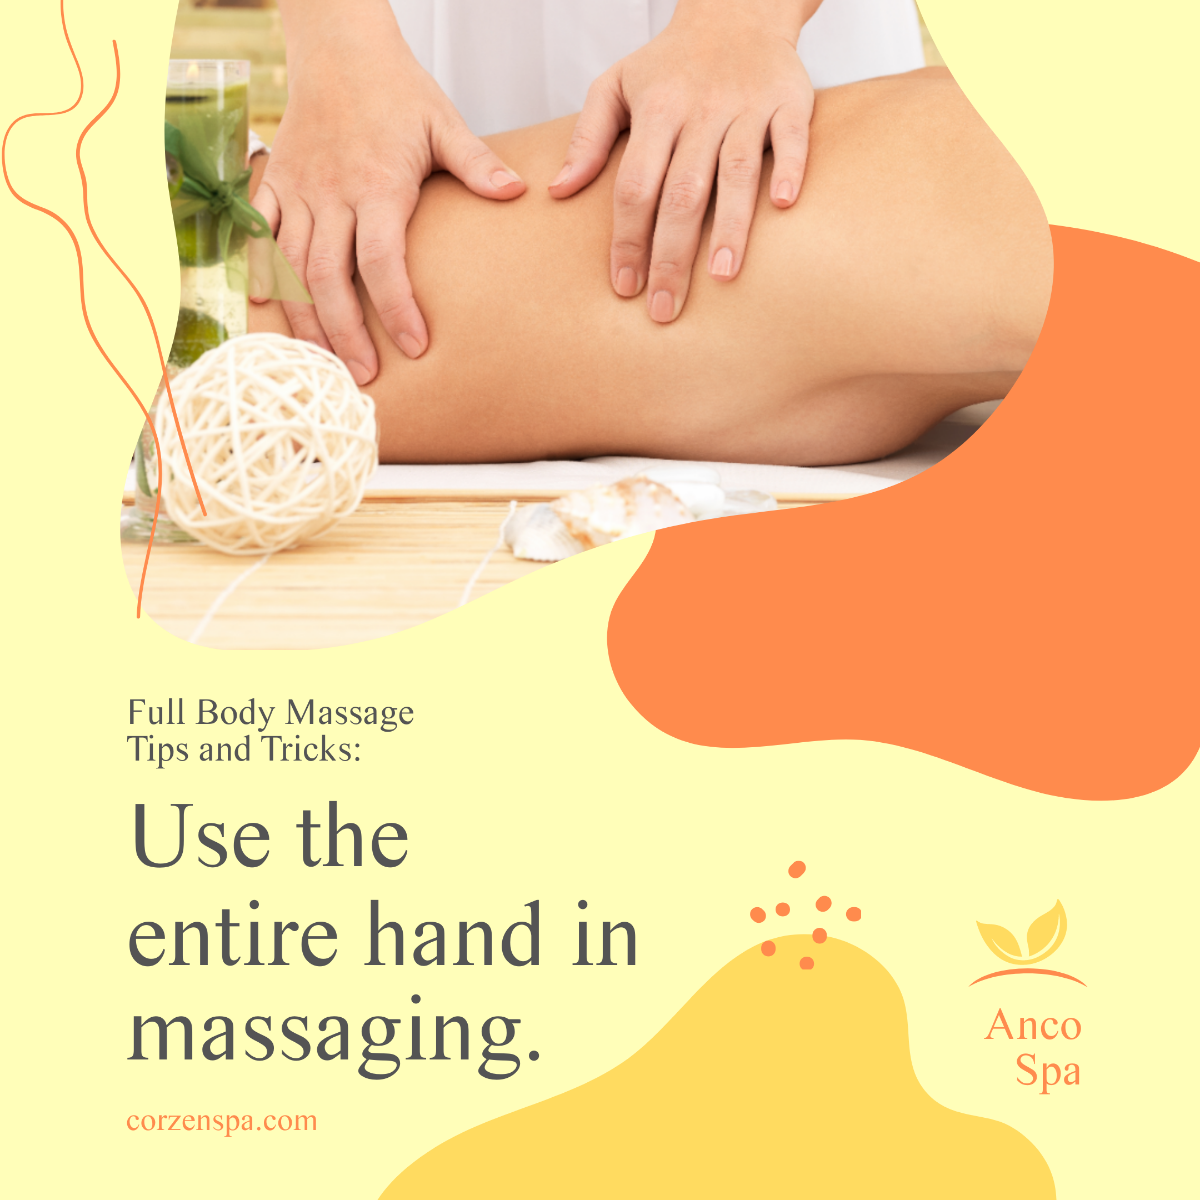 Free Full Body Massage Tips And Tricks Post, Instagram, Facebook Template